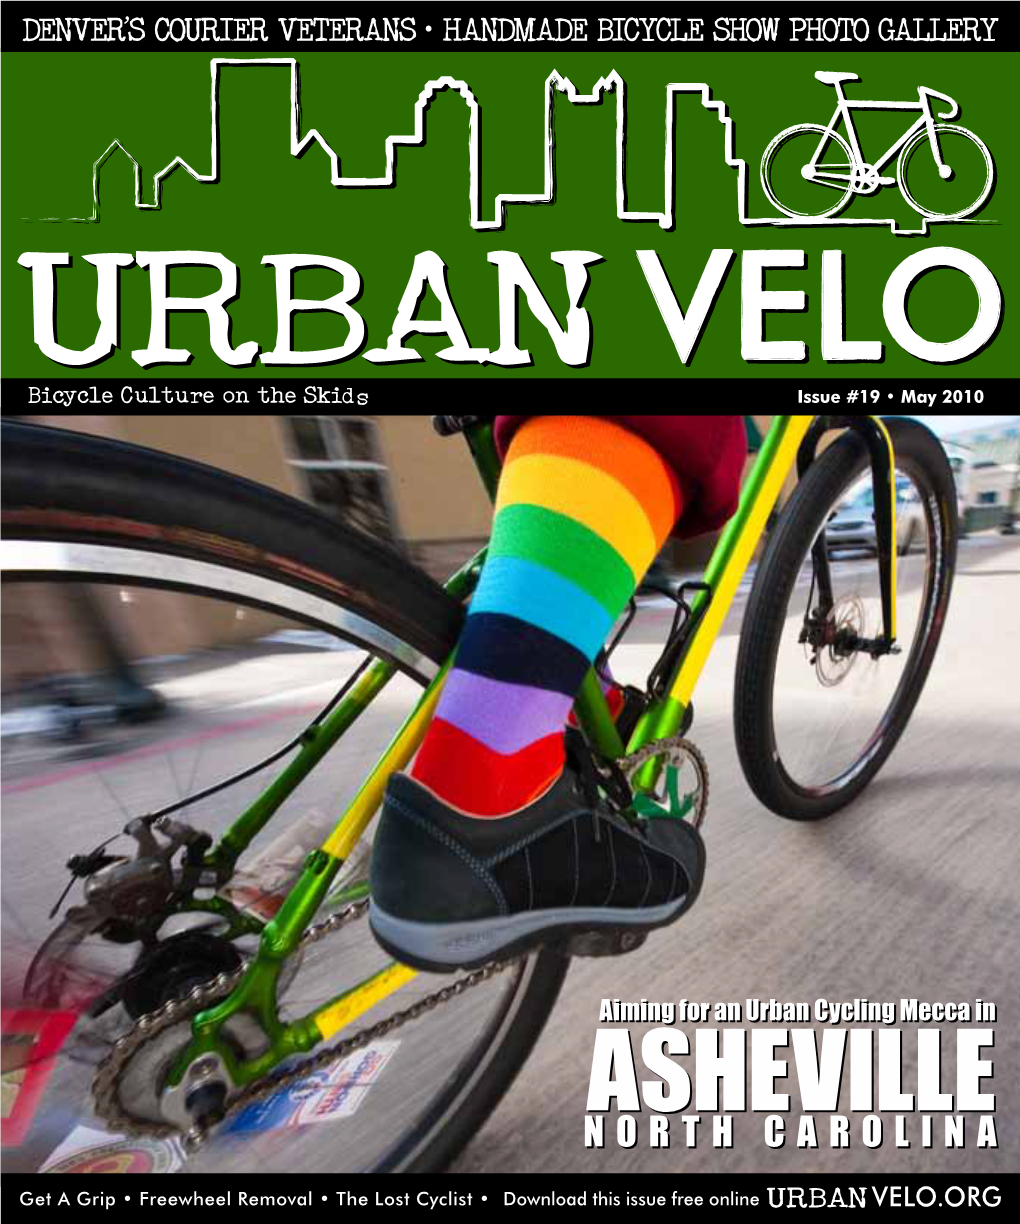 Download This Issue Free Online URBAN VELO.ORG AVAILABLE NOW